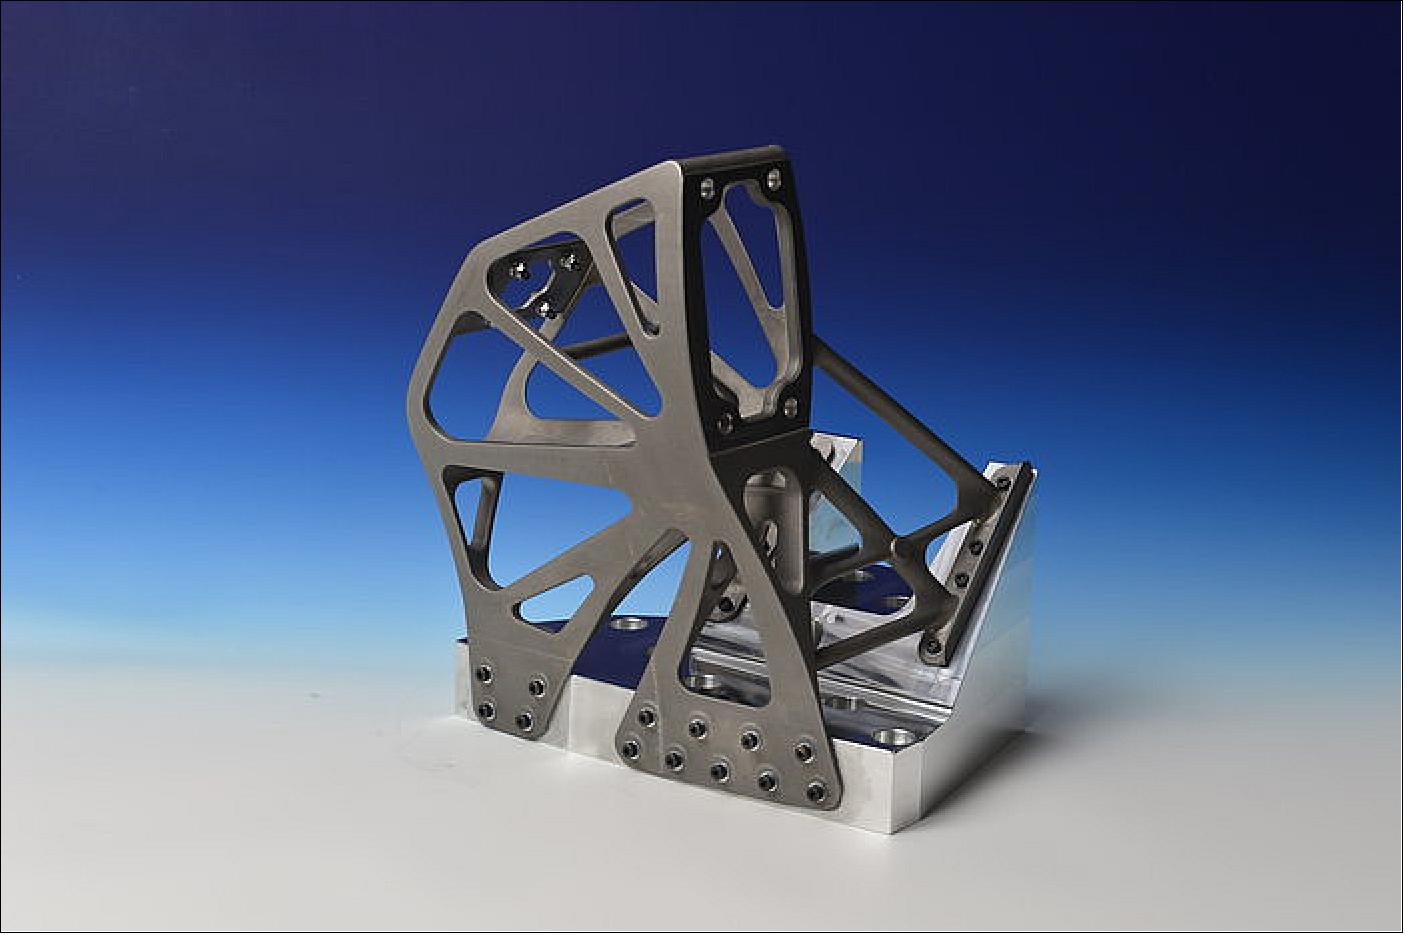 Figure 95: Technology image of the week. This organically-styled bracket, designed for the interior of an Ariane 5 launcher, was 3D printed in space-worthy titanium alloy for an R&D project (image credit: ESA, A. Abel)